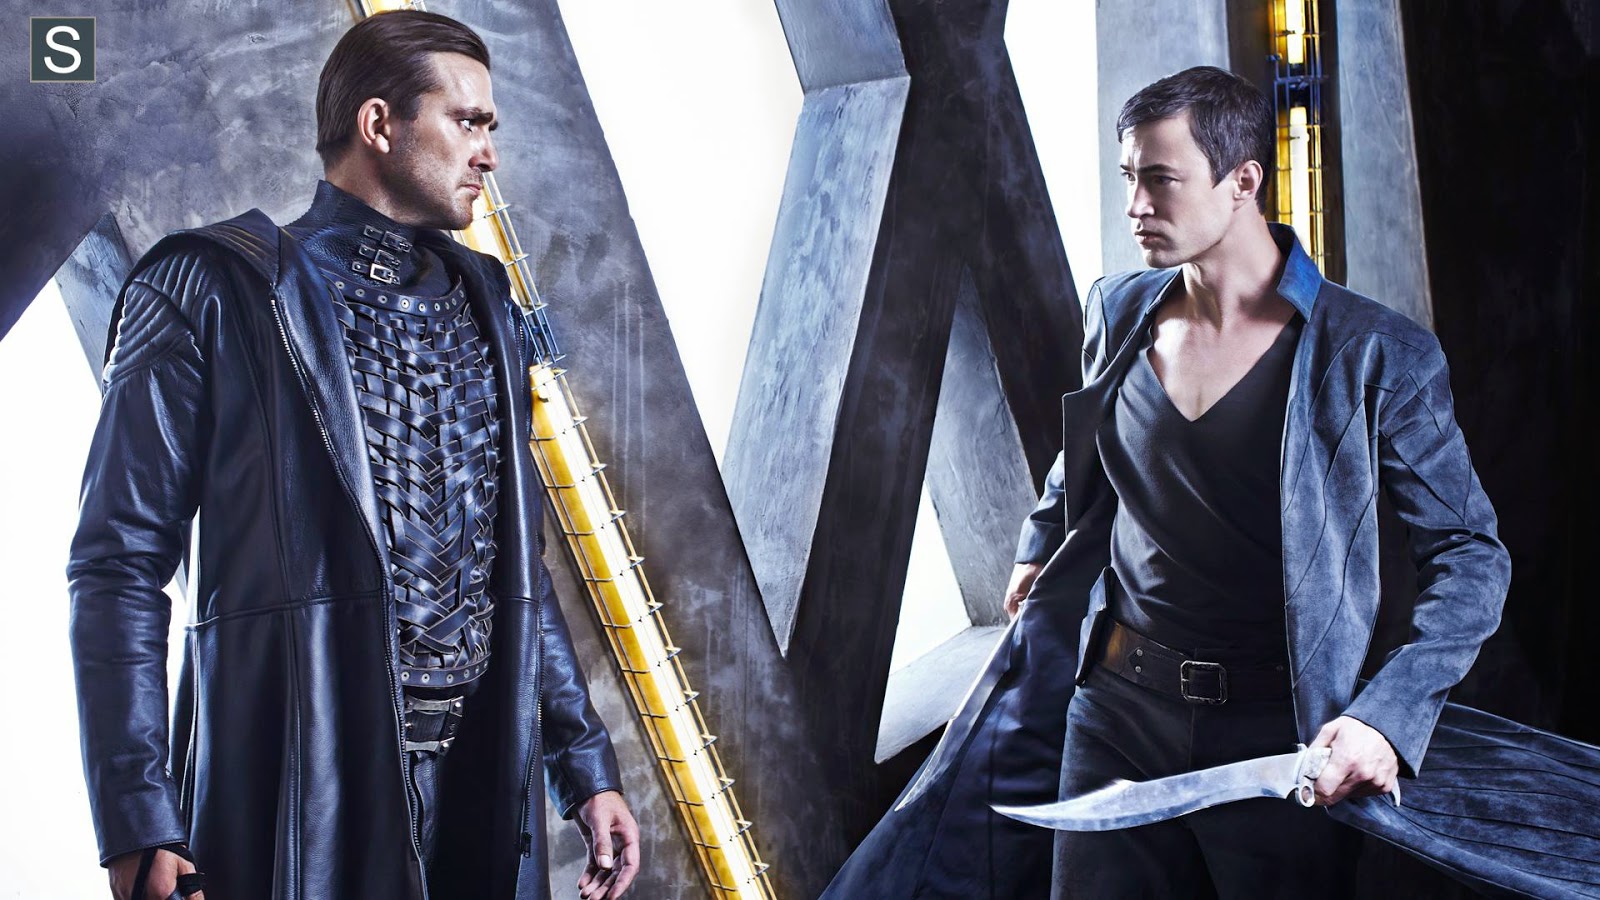 Dominion - Pilot -  Advance Preview: "War is coming."